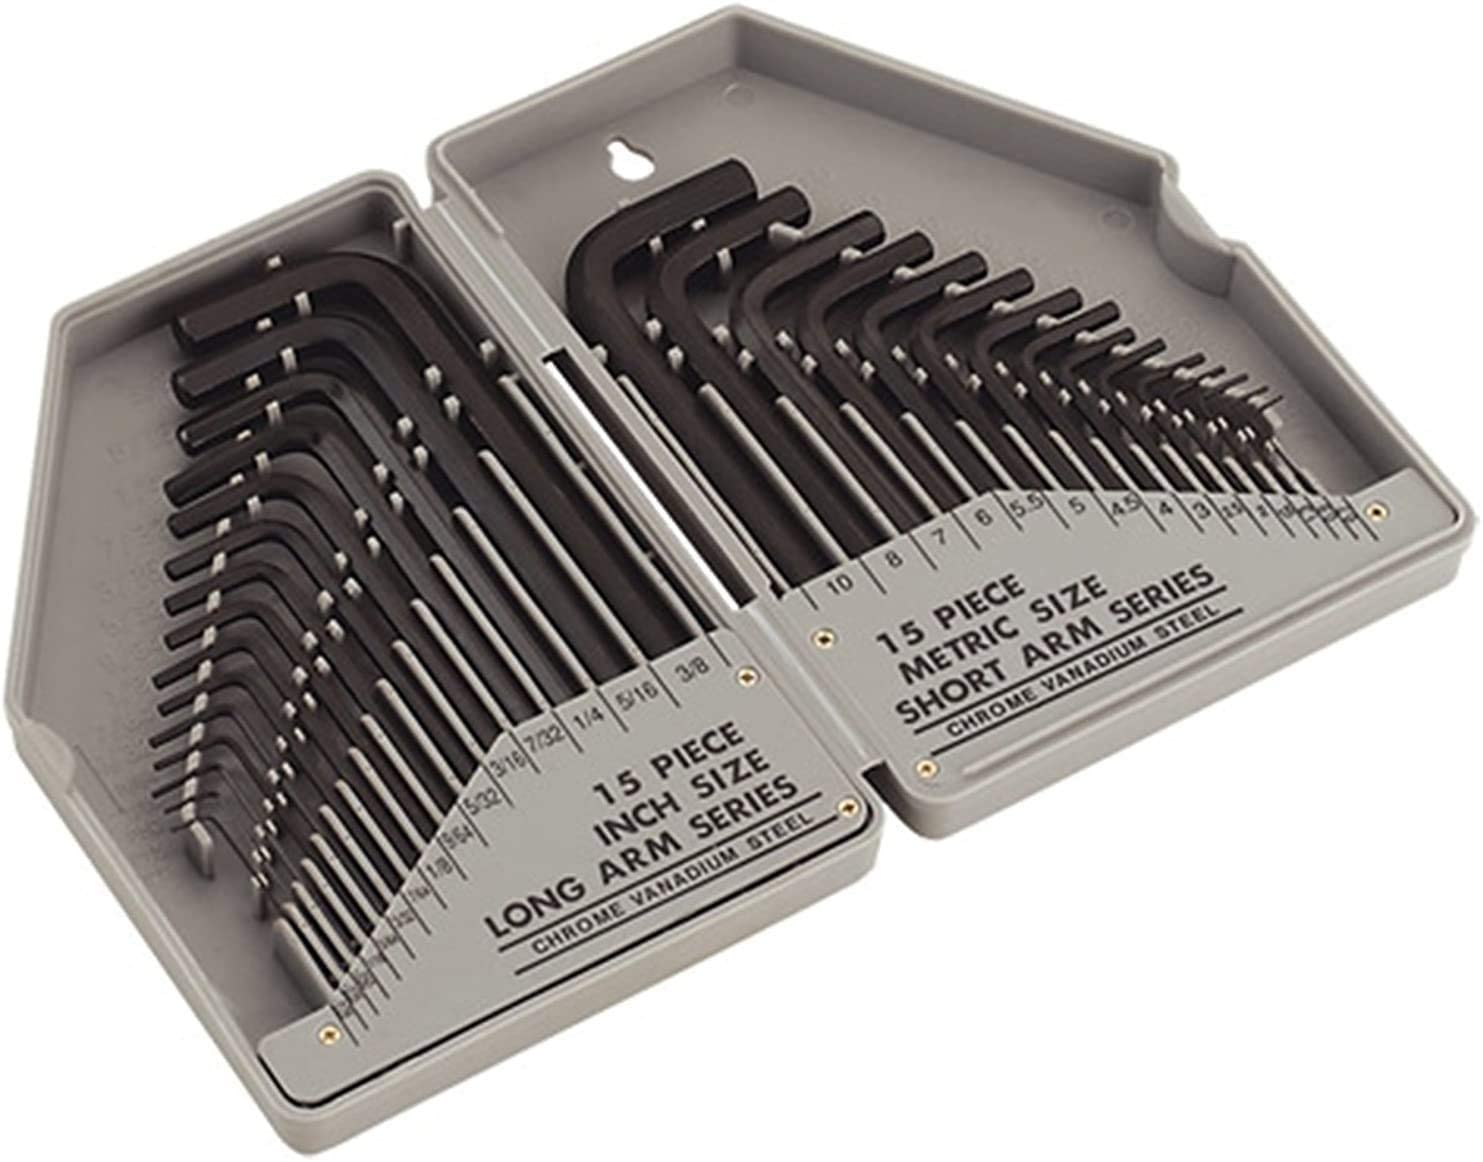 Toolzone HX023 30pc Large Hex Allen Key Set Metric Imperial 0.7mm - 10mm